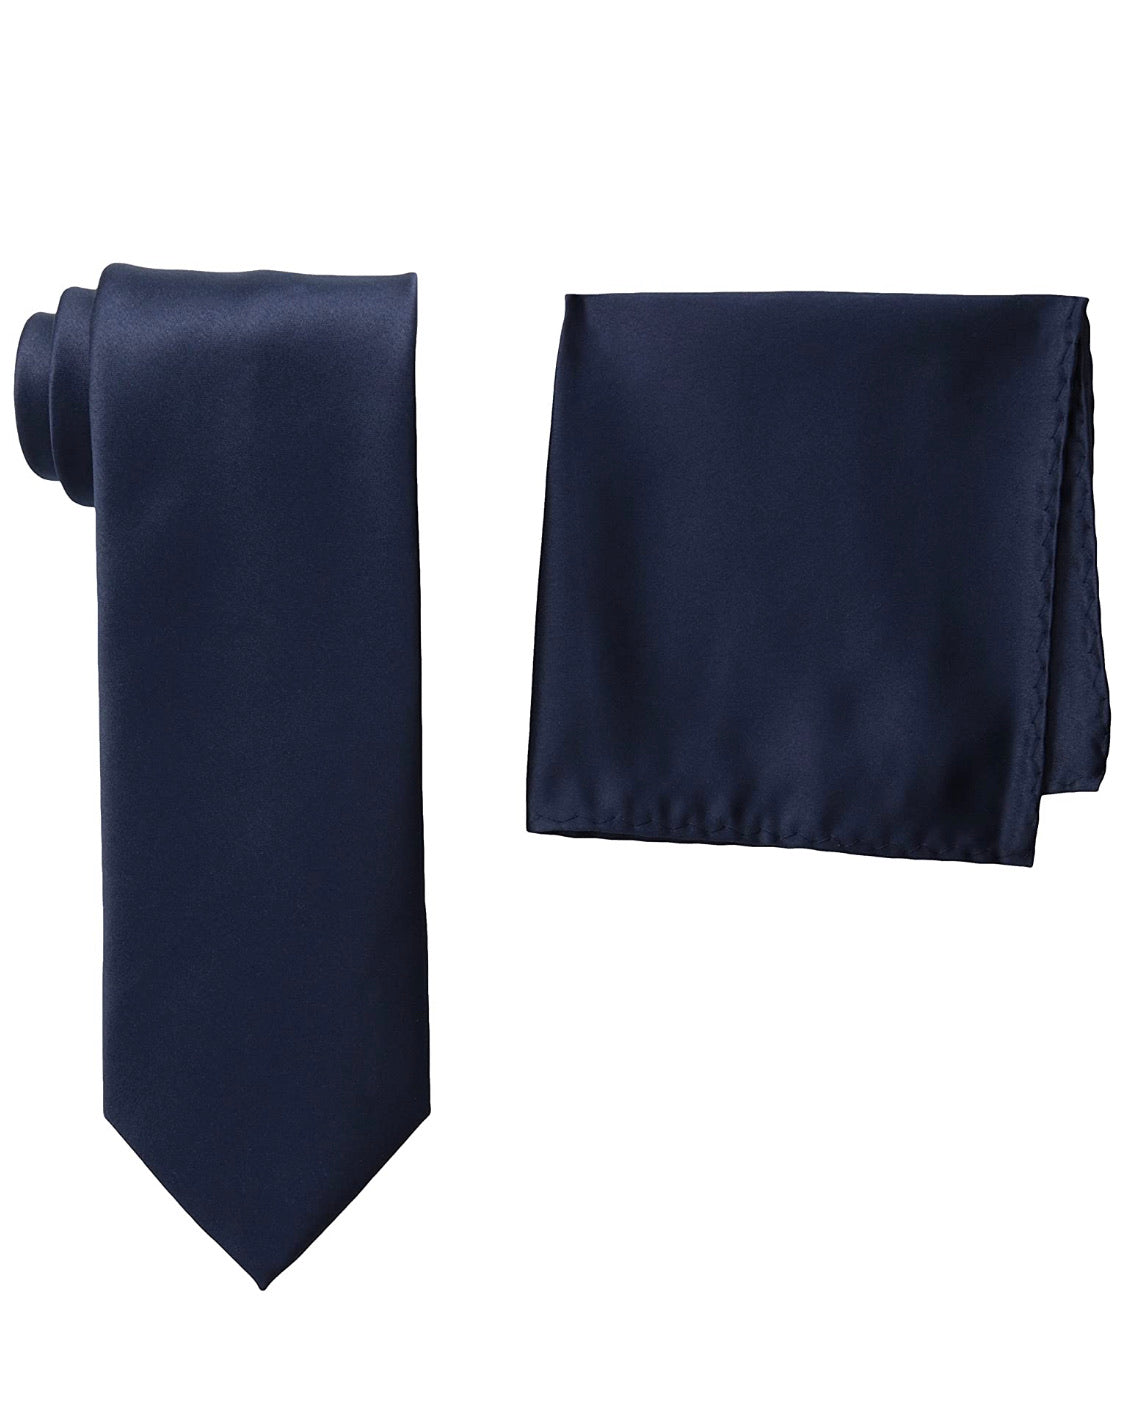 Stacy Adams Solid Navy Tie and Hanky - On Time Fashions Tuscaloosa